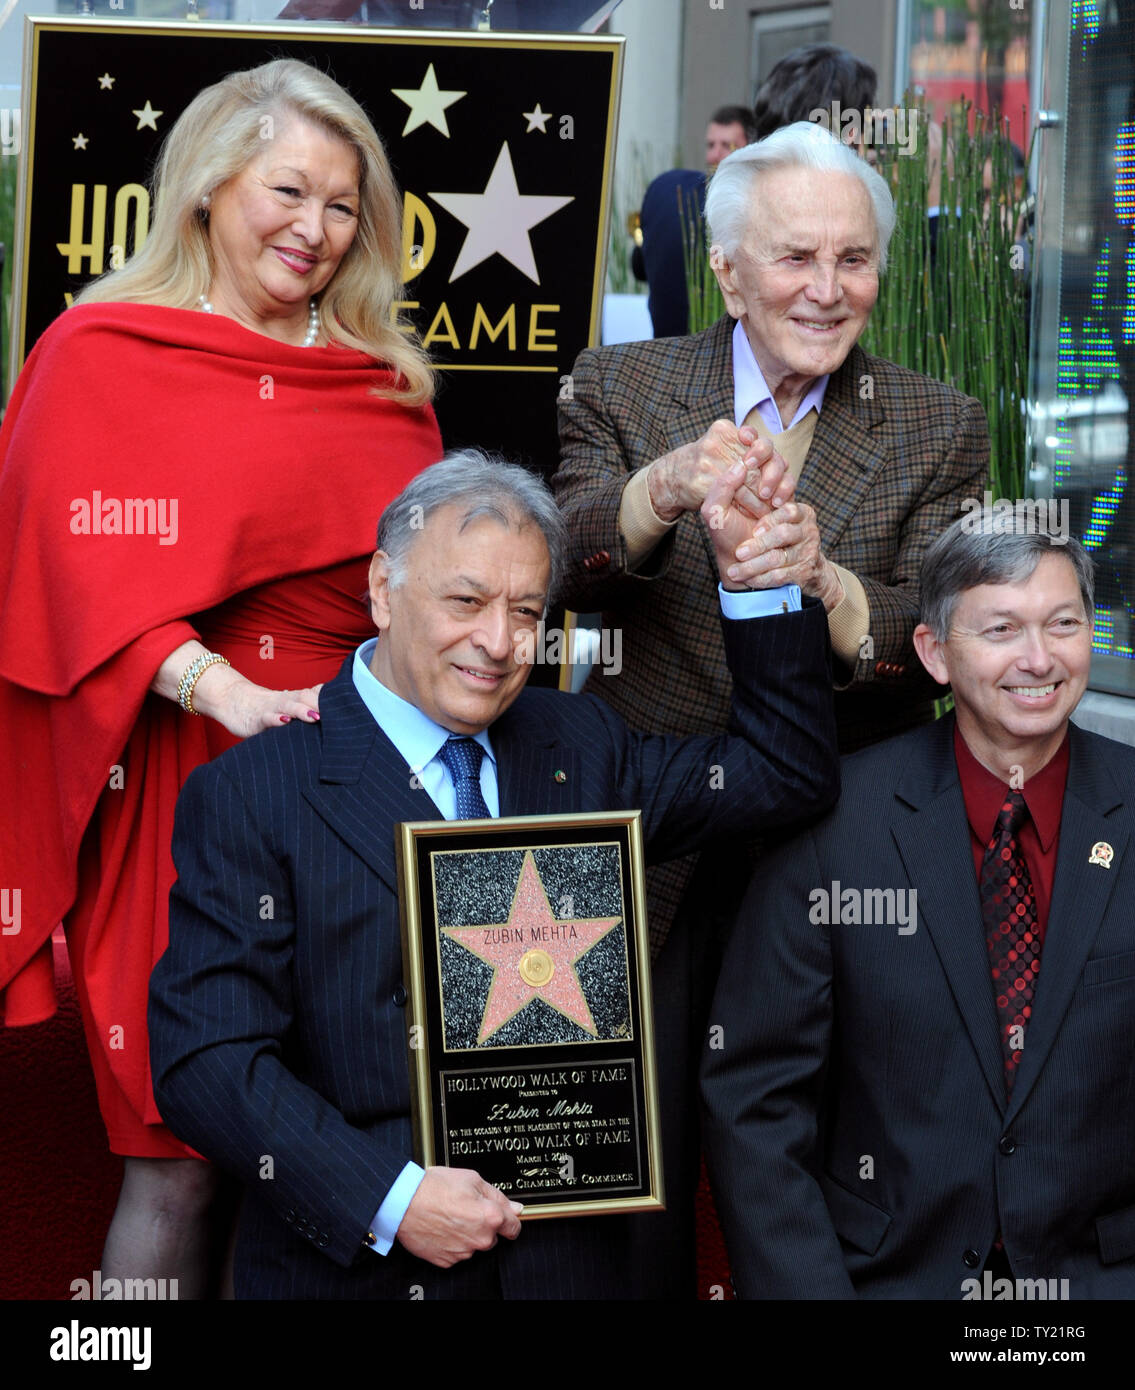 International orchestral and operatic conductor Zubin Mehta holds hands with friend, actor Kirk Doulas during ceremonies honoring Mehta with  the 2,434th star on the Hollywood Walk of Fame in Los Angeles on March 1, 2011. With Mehta is his wife Nancy (L) and Leron Gubler, lower right, president of the Hollywood Chamber of Commerce.  UPI/Jim Ruymen Stock Photo